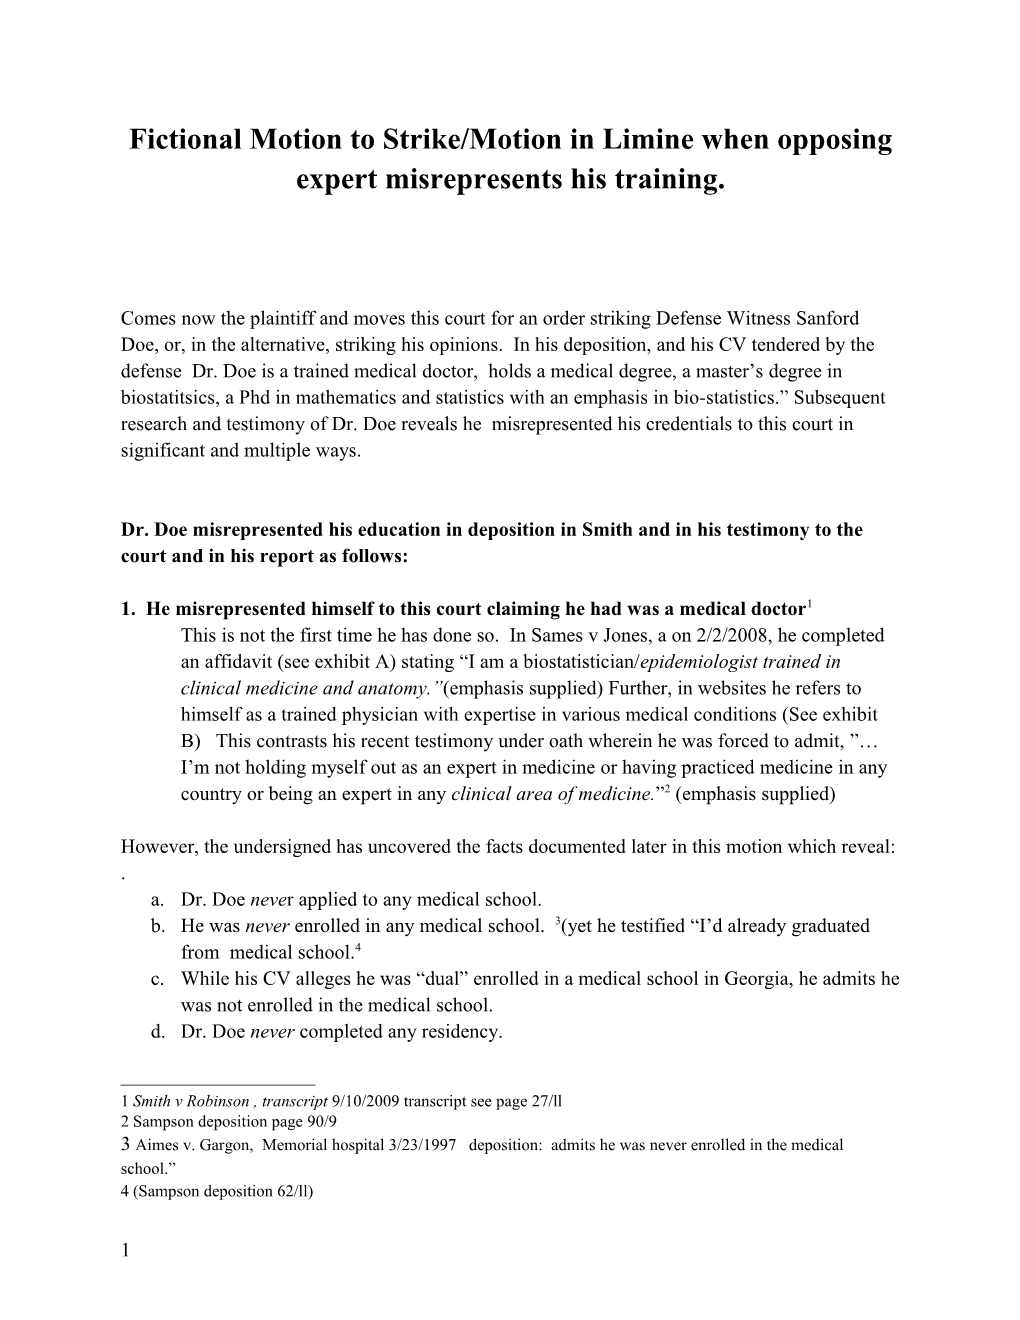 Fictional Motion to Strike/Motion in Limine When Opposing Expert Misrepresents His Training